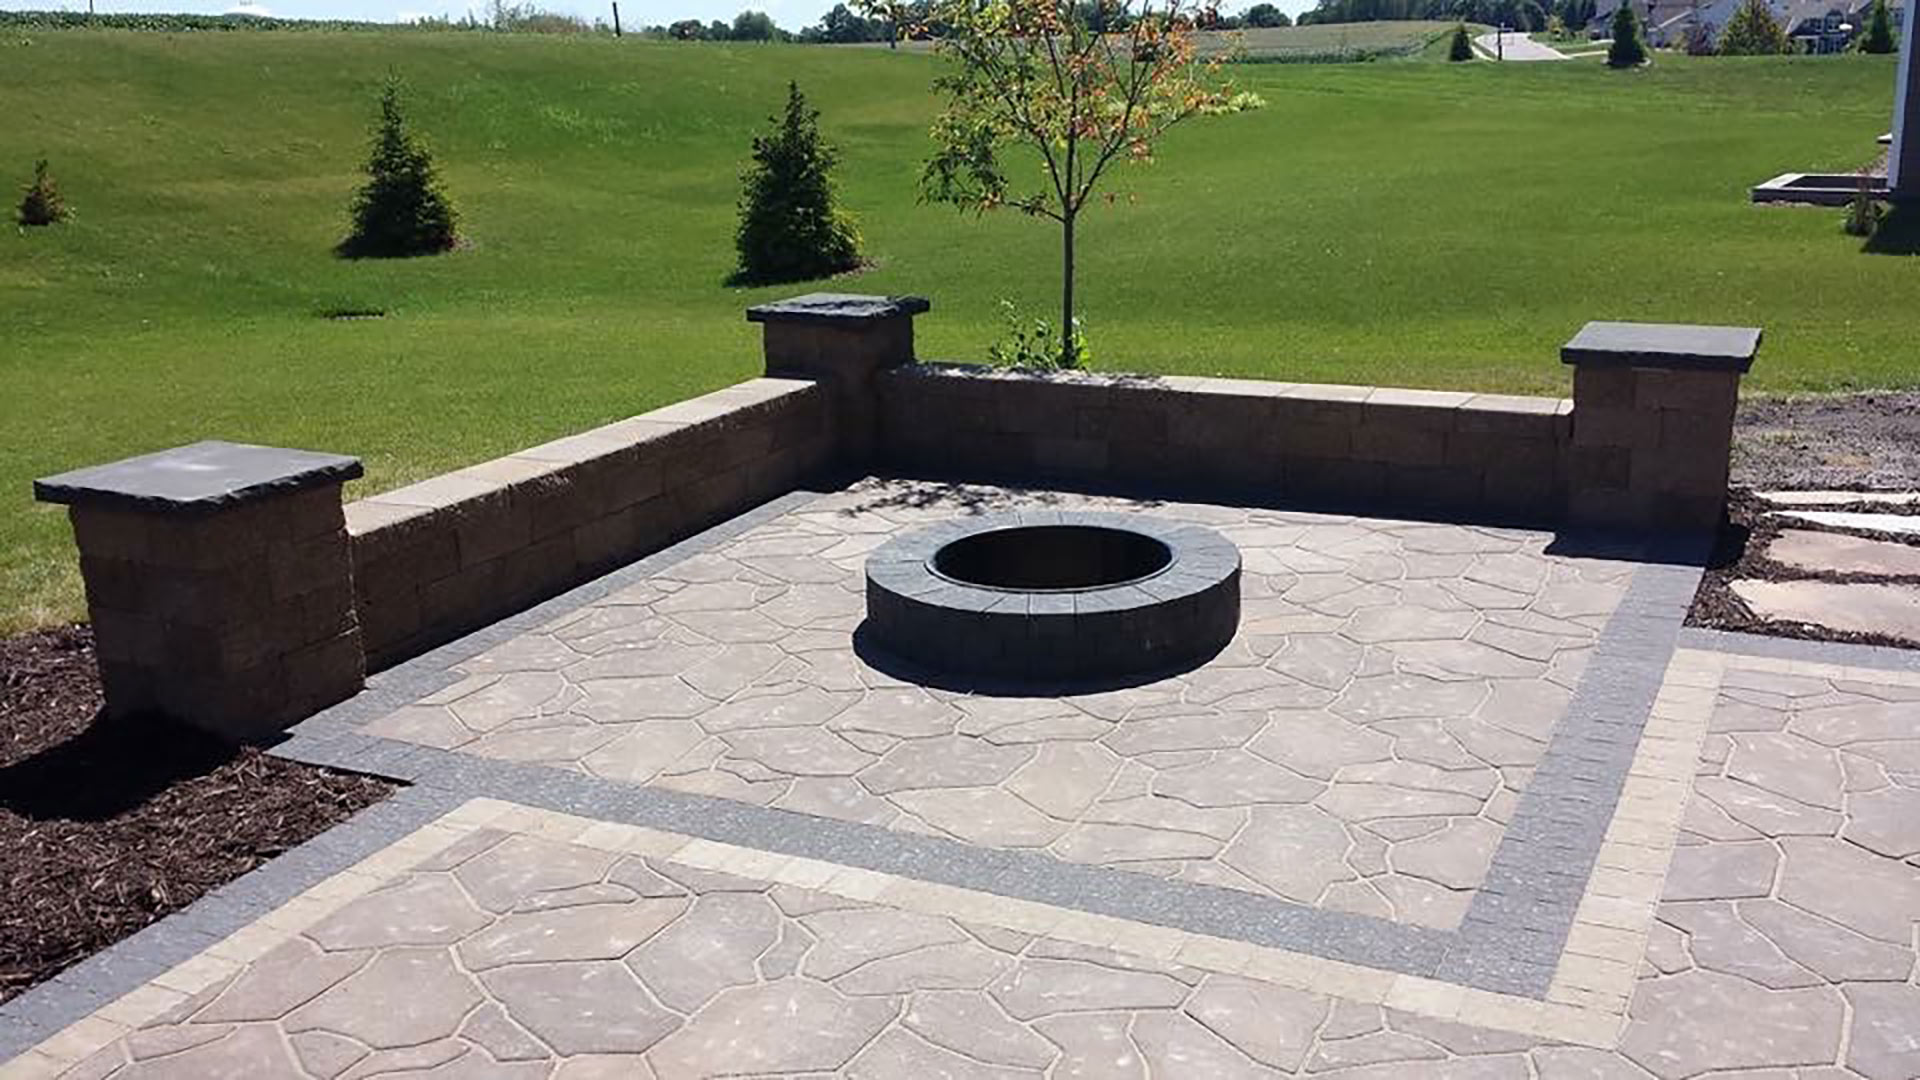 Hardscape features installed including seating wall, patio, and fire pit in Urbandale, IA.